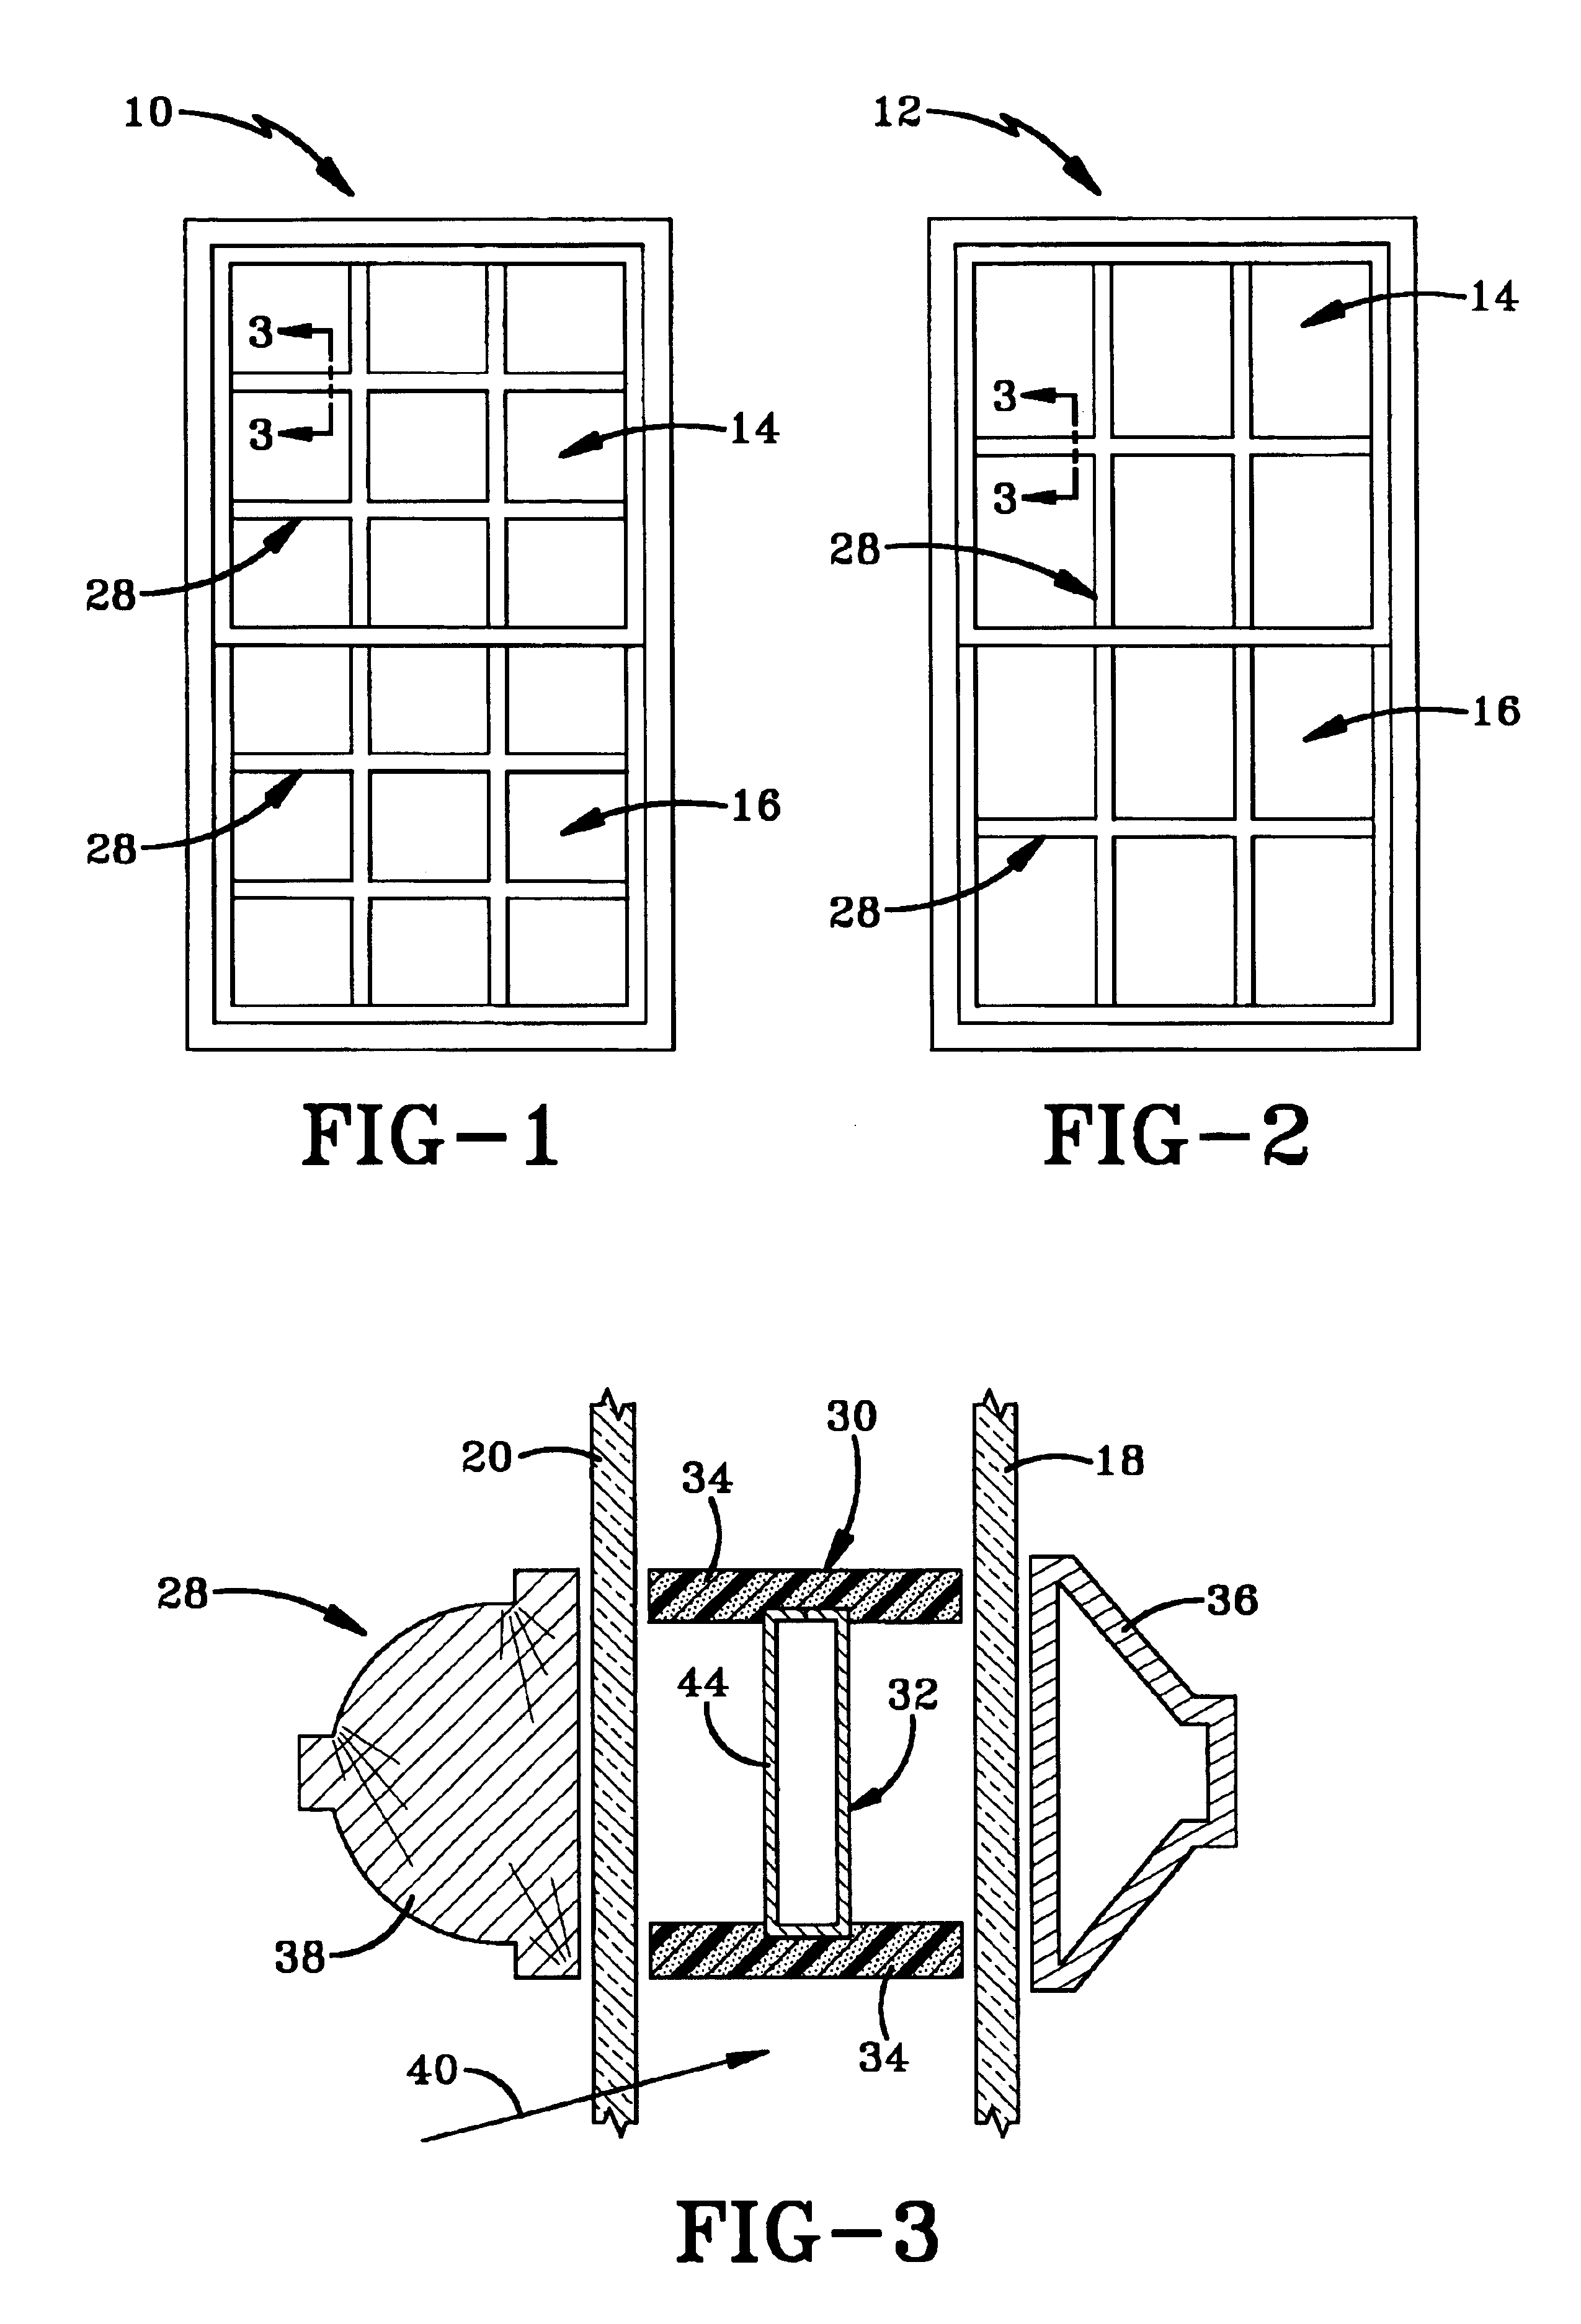 Method of fabricating muntin bars for simulated divided lite windows